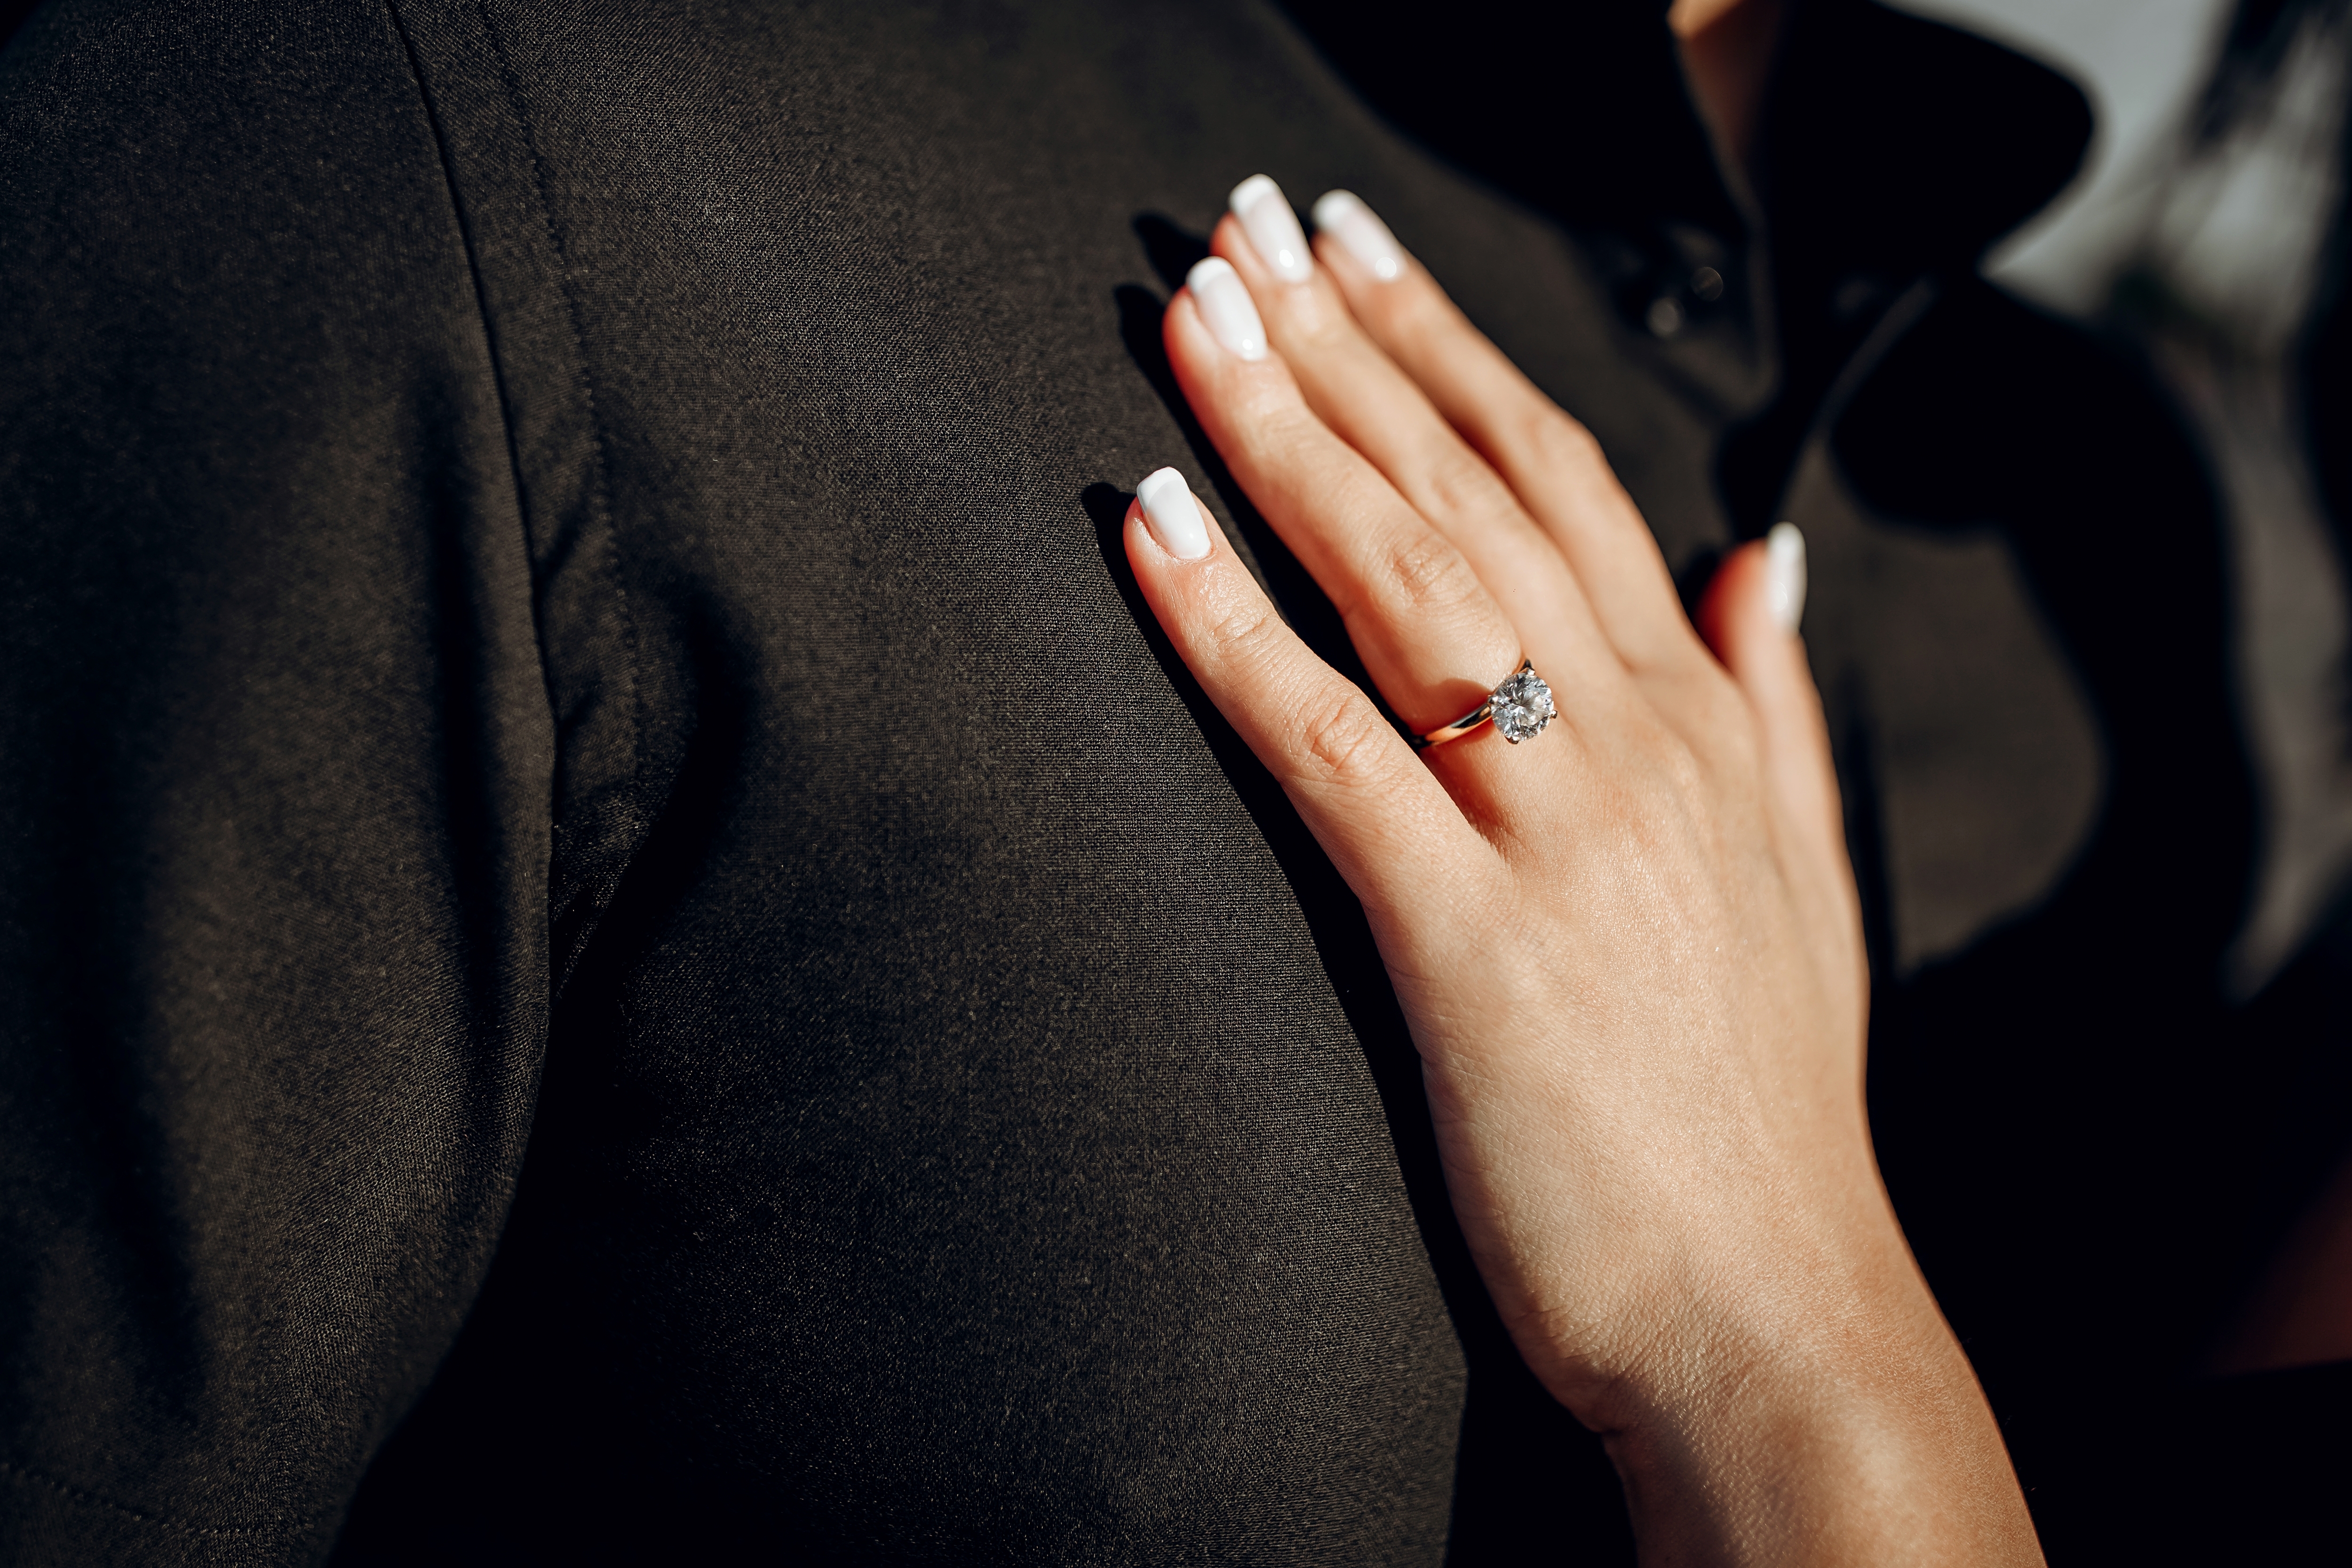 A woman with an engagement ring | Source: Shutterstock